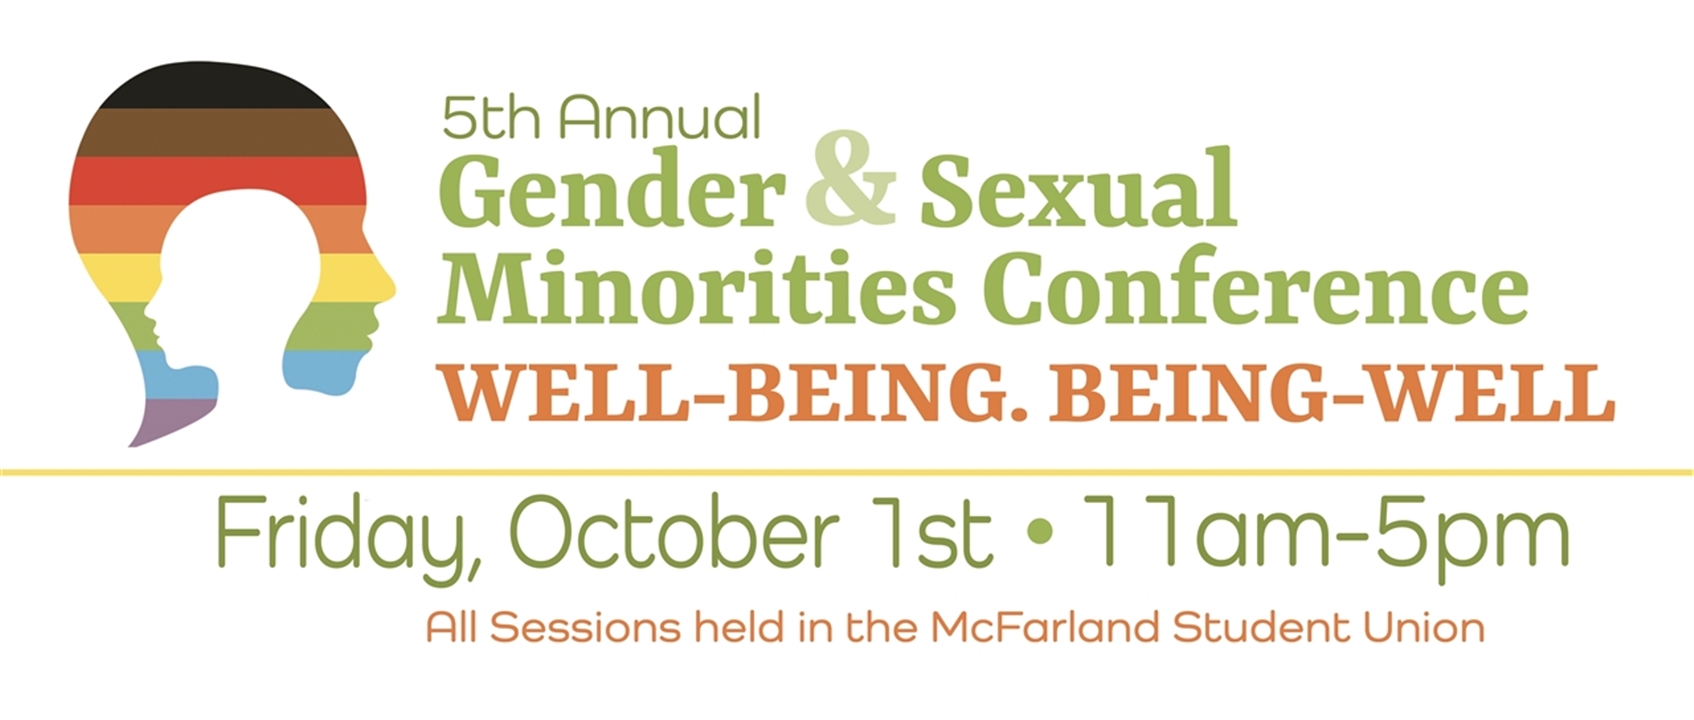 gender and sexual minorities conference banner with the tagline "well-being, being well." 